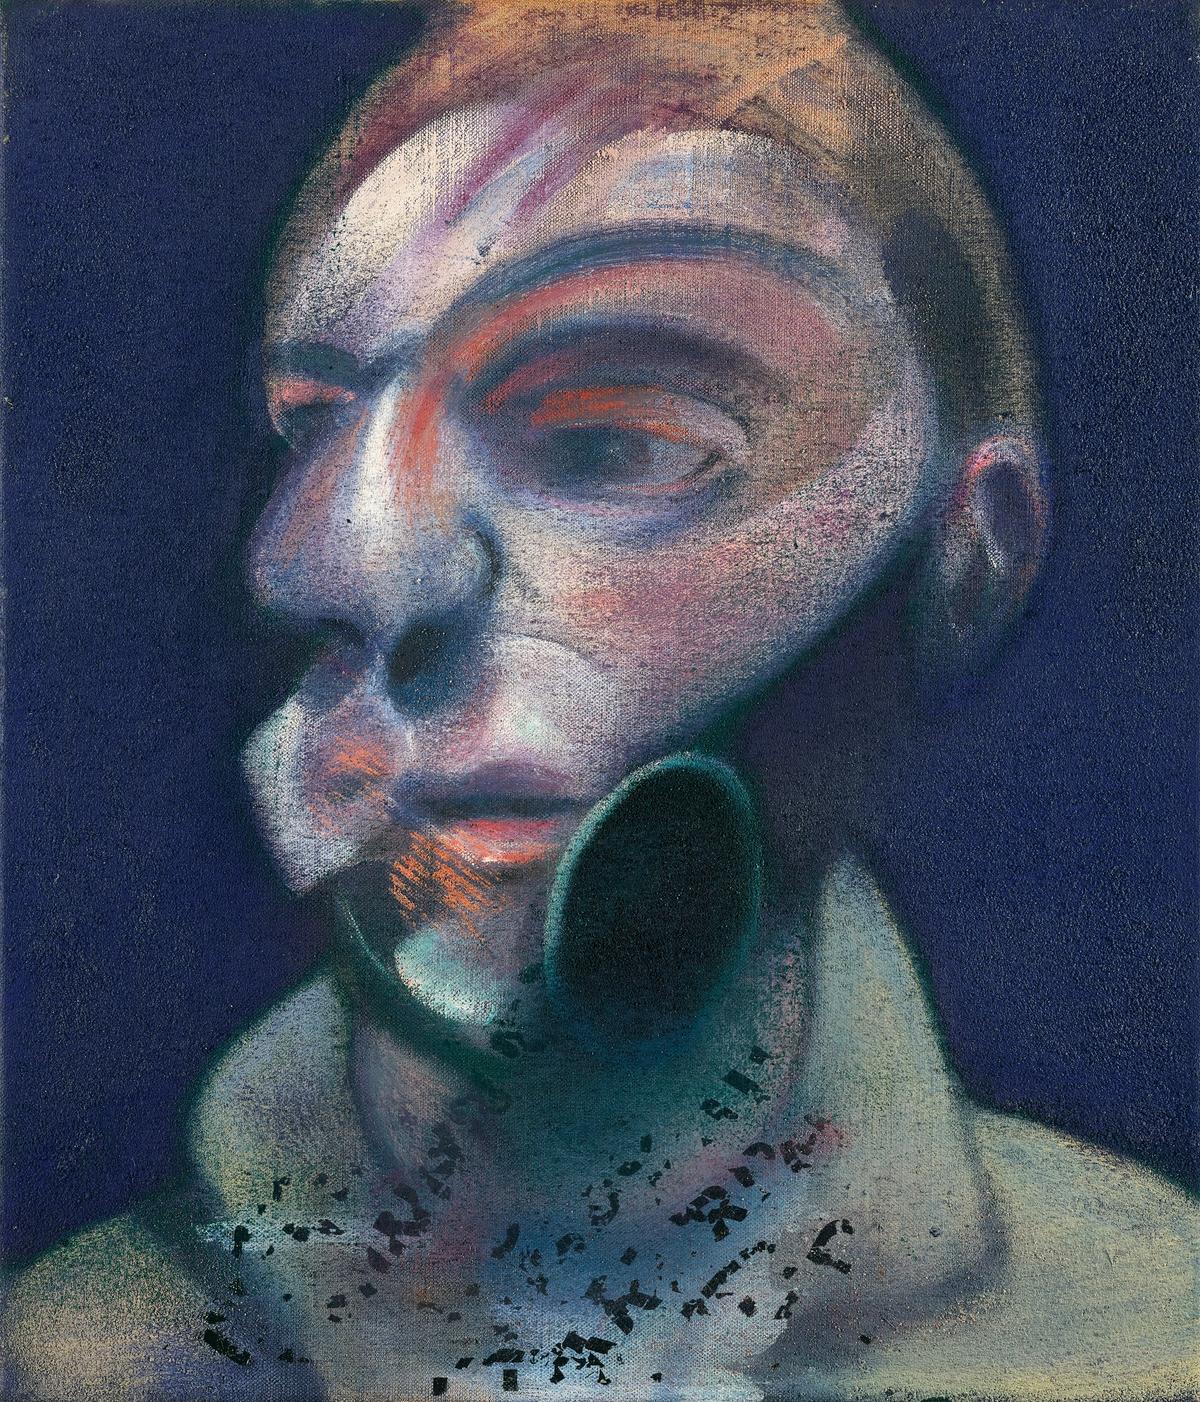 Francis Bacon's 1975 portrait sold for £16m (with fees), only a £1.2m return since it was last sold four years ago. Sotheby's